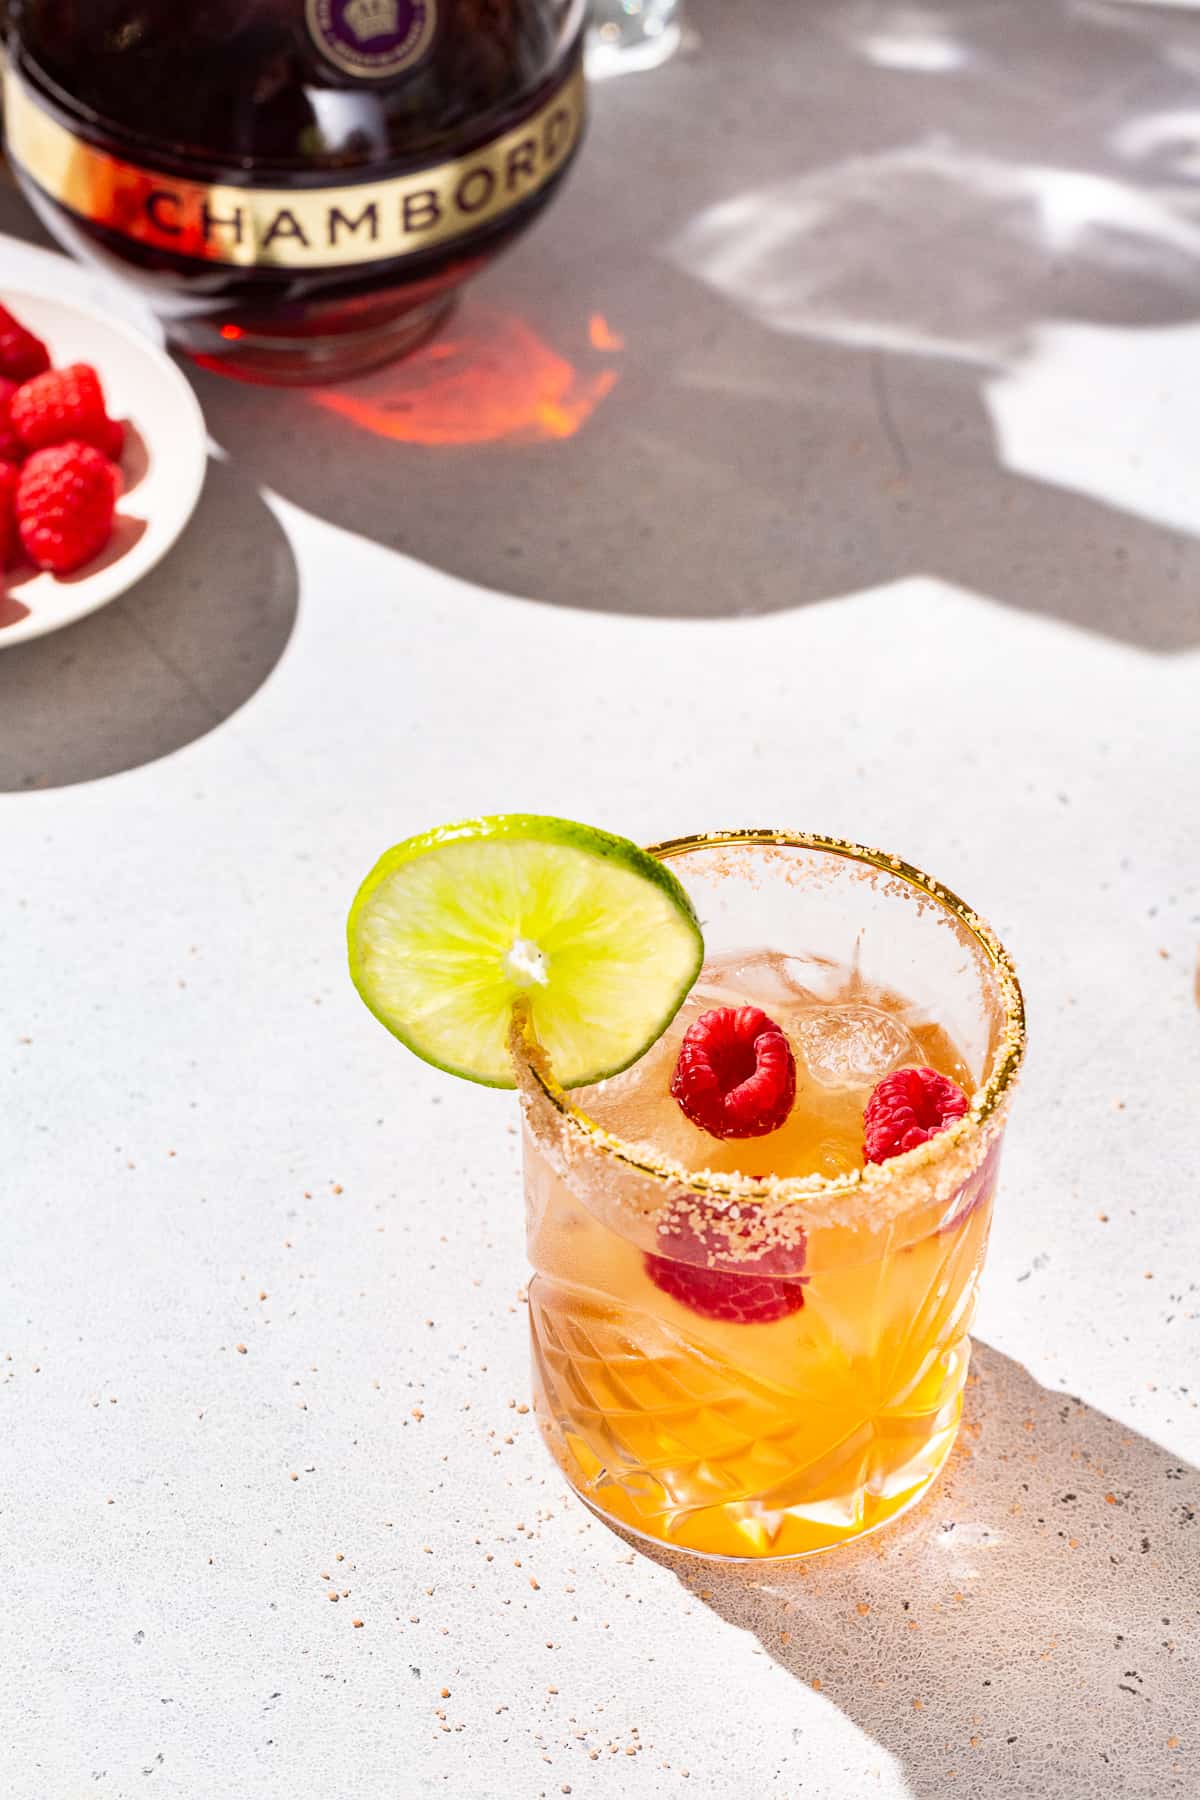 Overhead view of a Chambord raspberry margarita. The drink is in a gold-rimmed glass that also has salt on the rim. It has a cut lime and raspberries as garnish. A dish of fresh raspberries is seen in the background along with a bottle of Chambord liqueur.